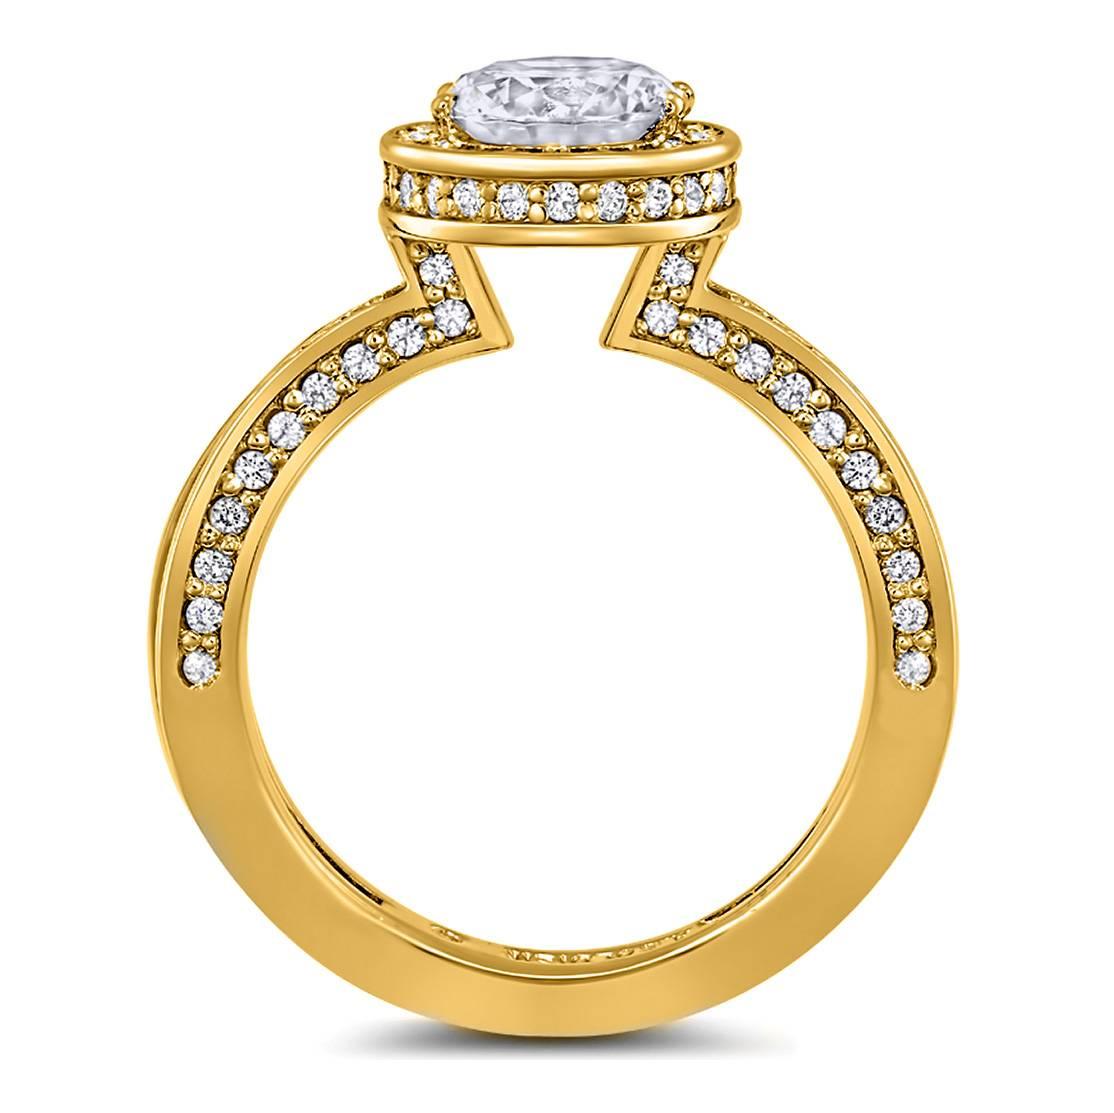 Women's Alex Soldier Eternal Love Diamond Engagement Ring in Yellow Gold, 1.55 ct. 